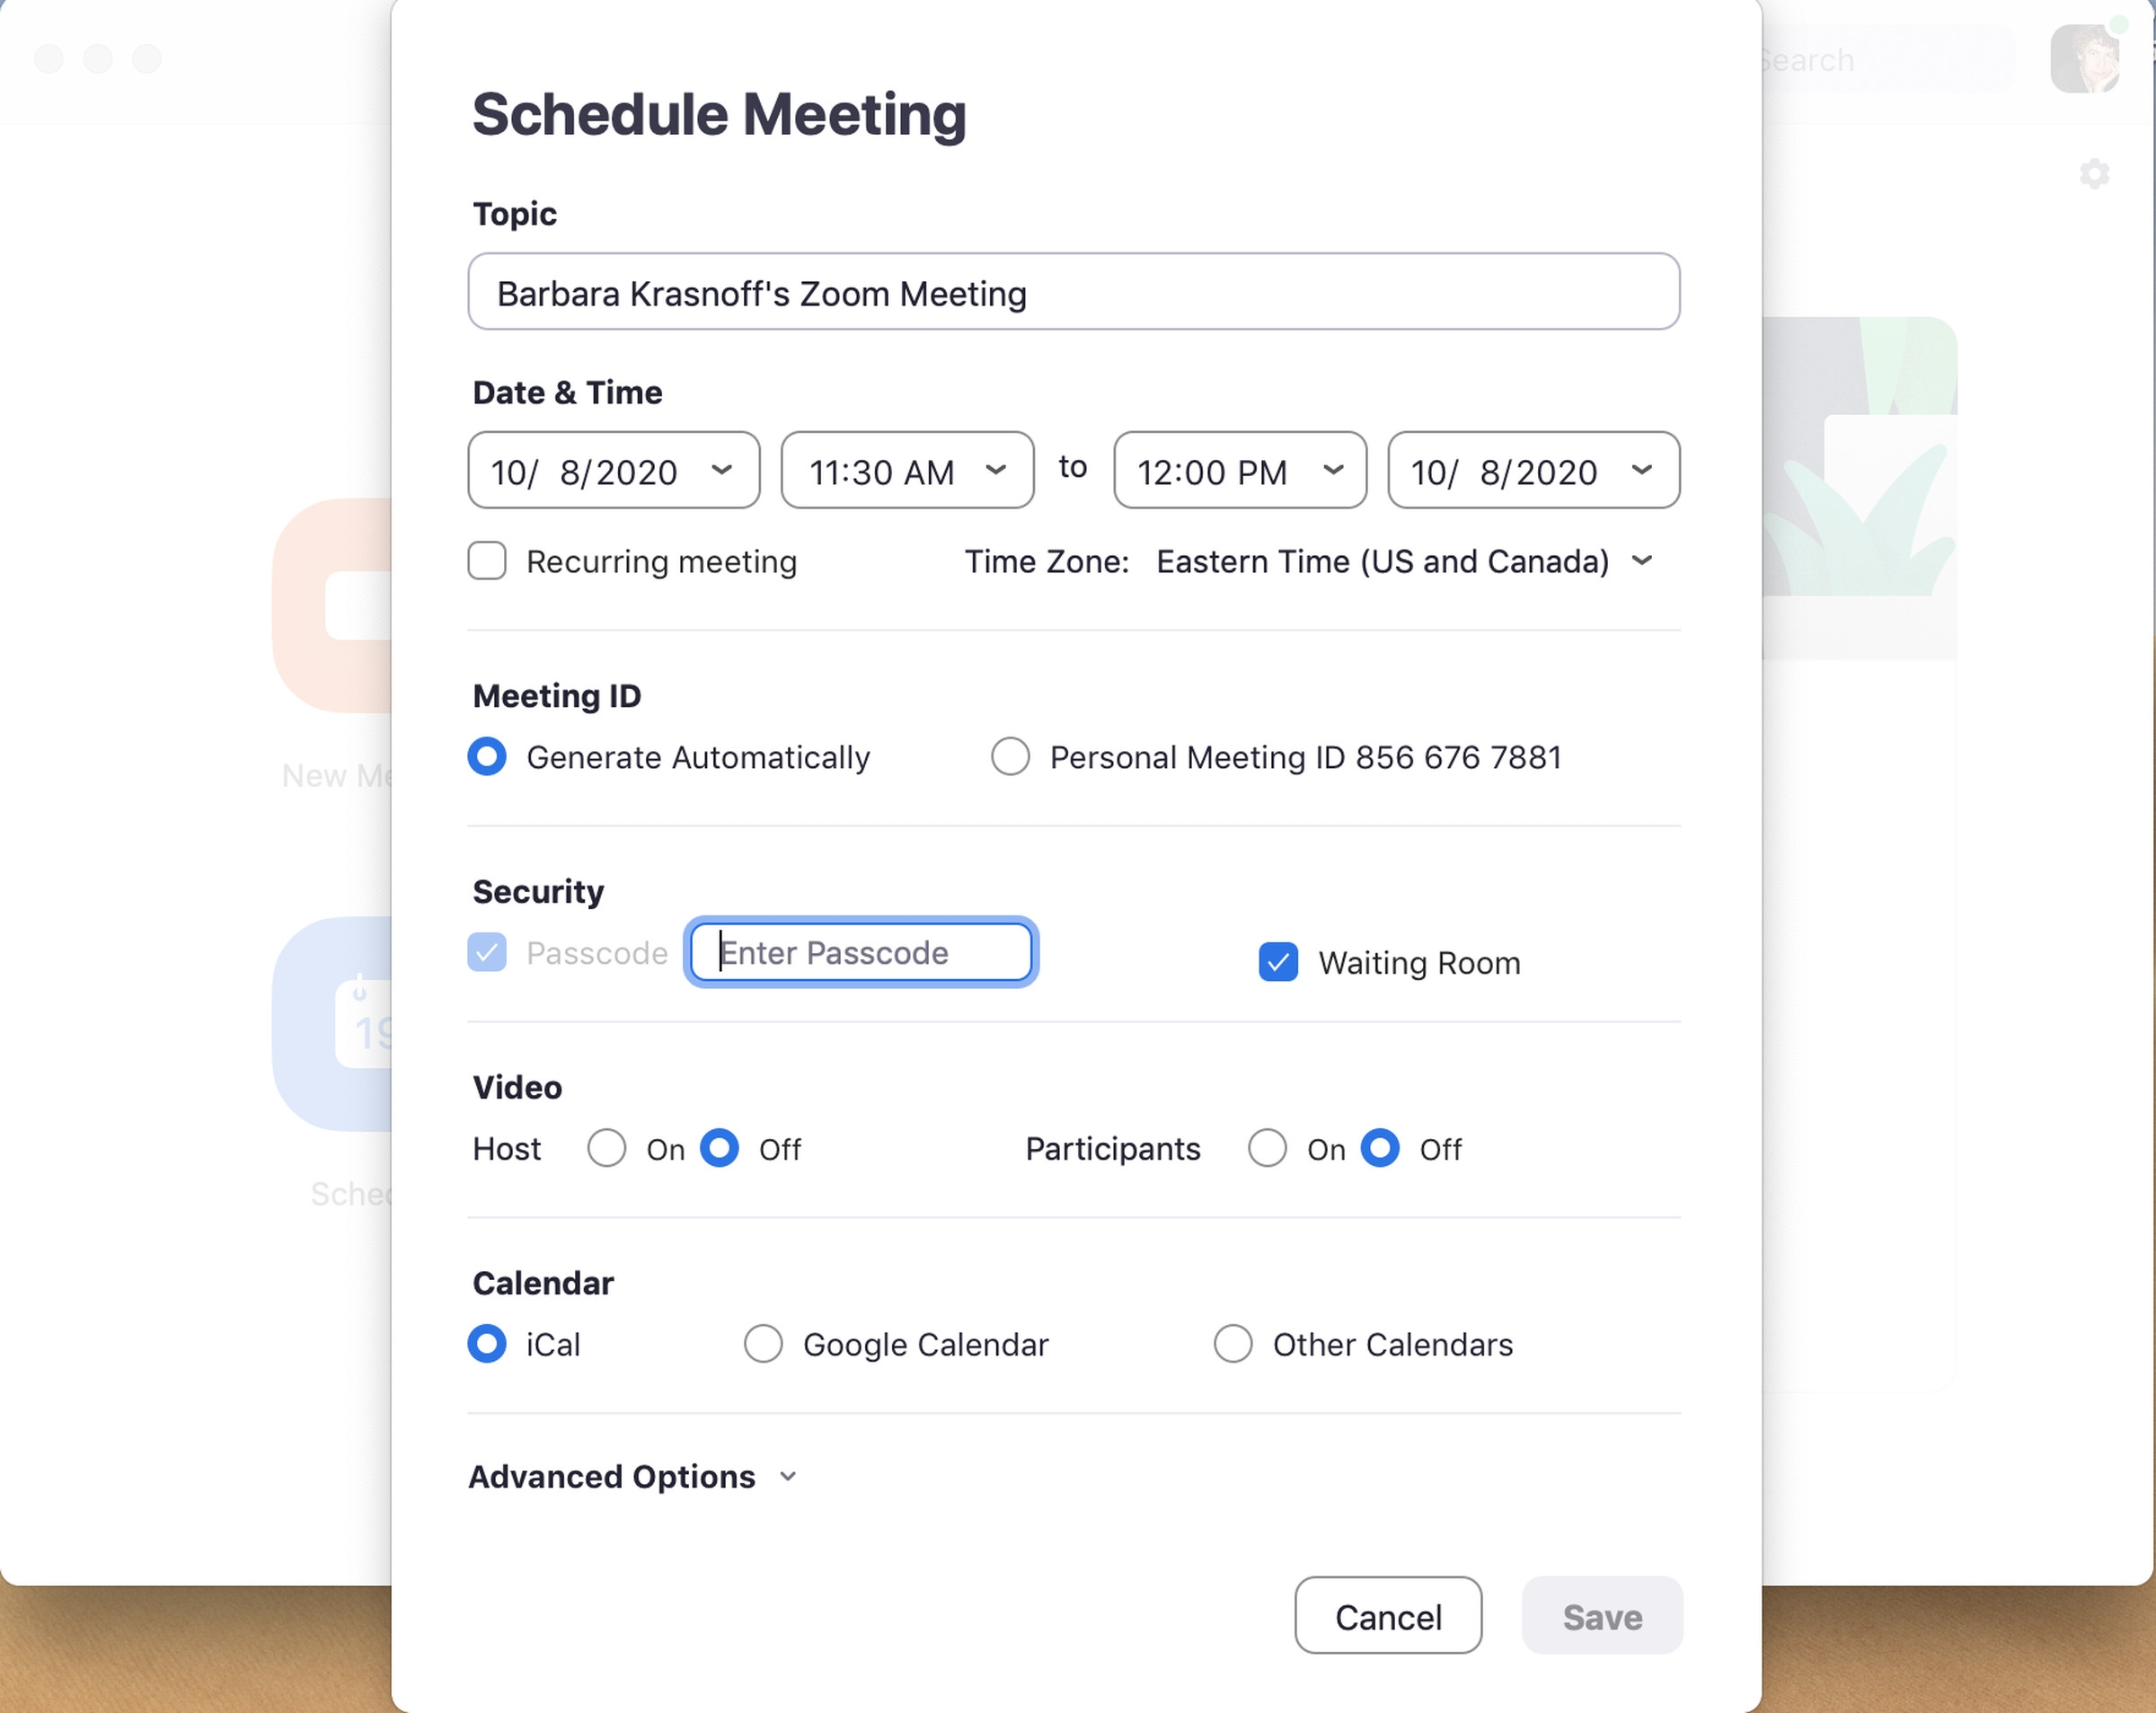 When you schedule a meeting, you get a variety of options for security and notification.